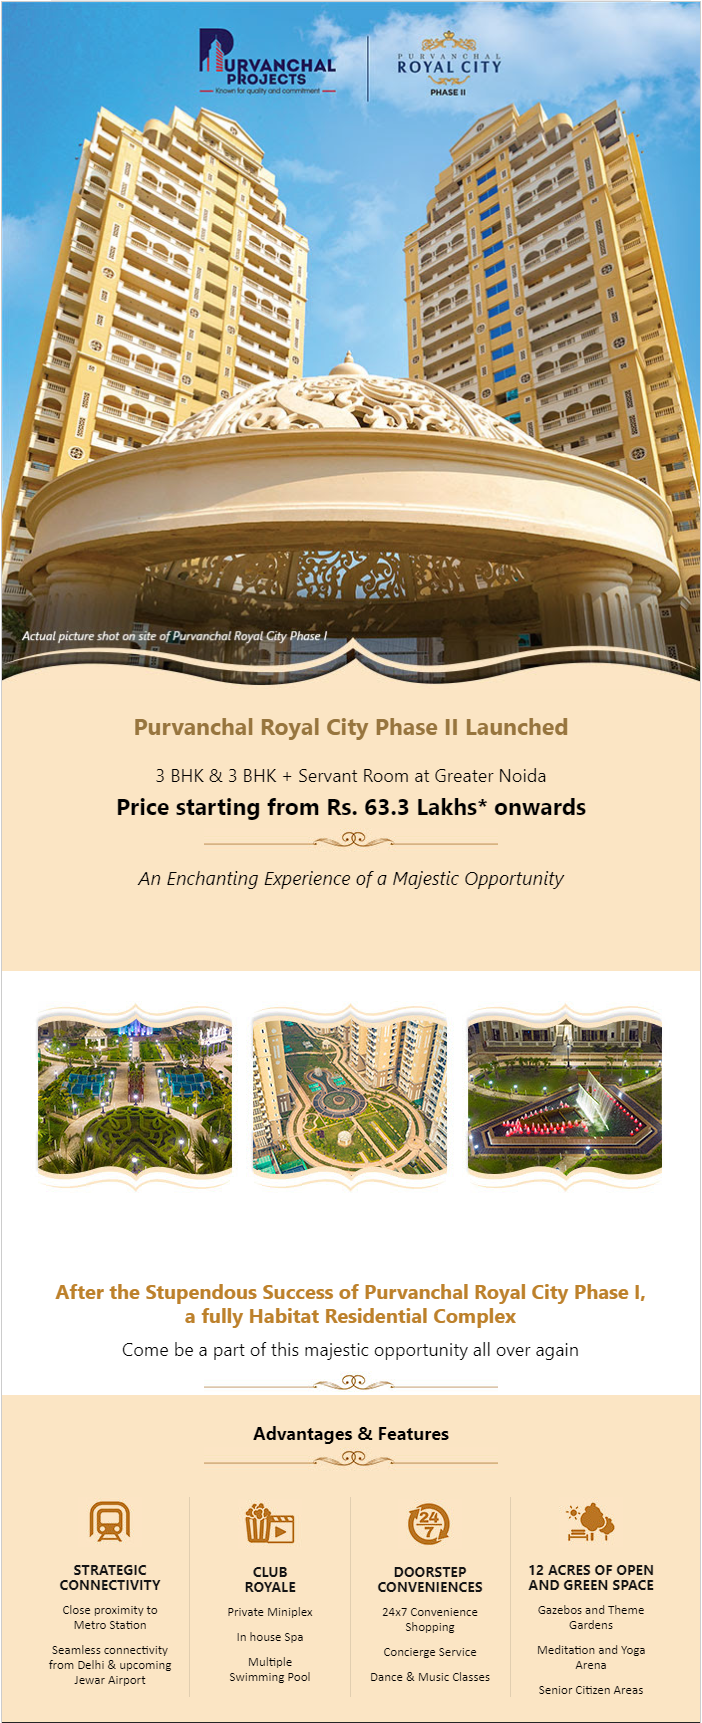 Launching 3 BHK + Servant Room at Rs. 63.3 lakhs at Purvanchal Royal City Phase 2 in Greater Noida